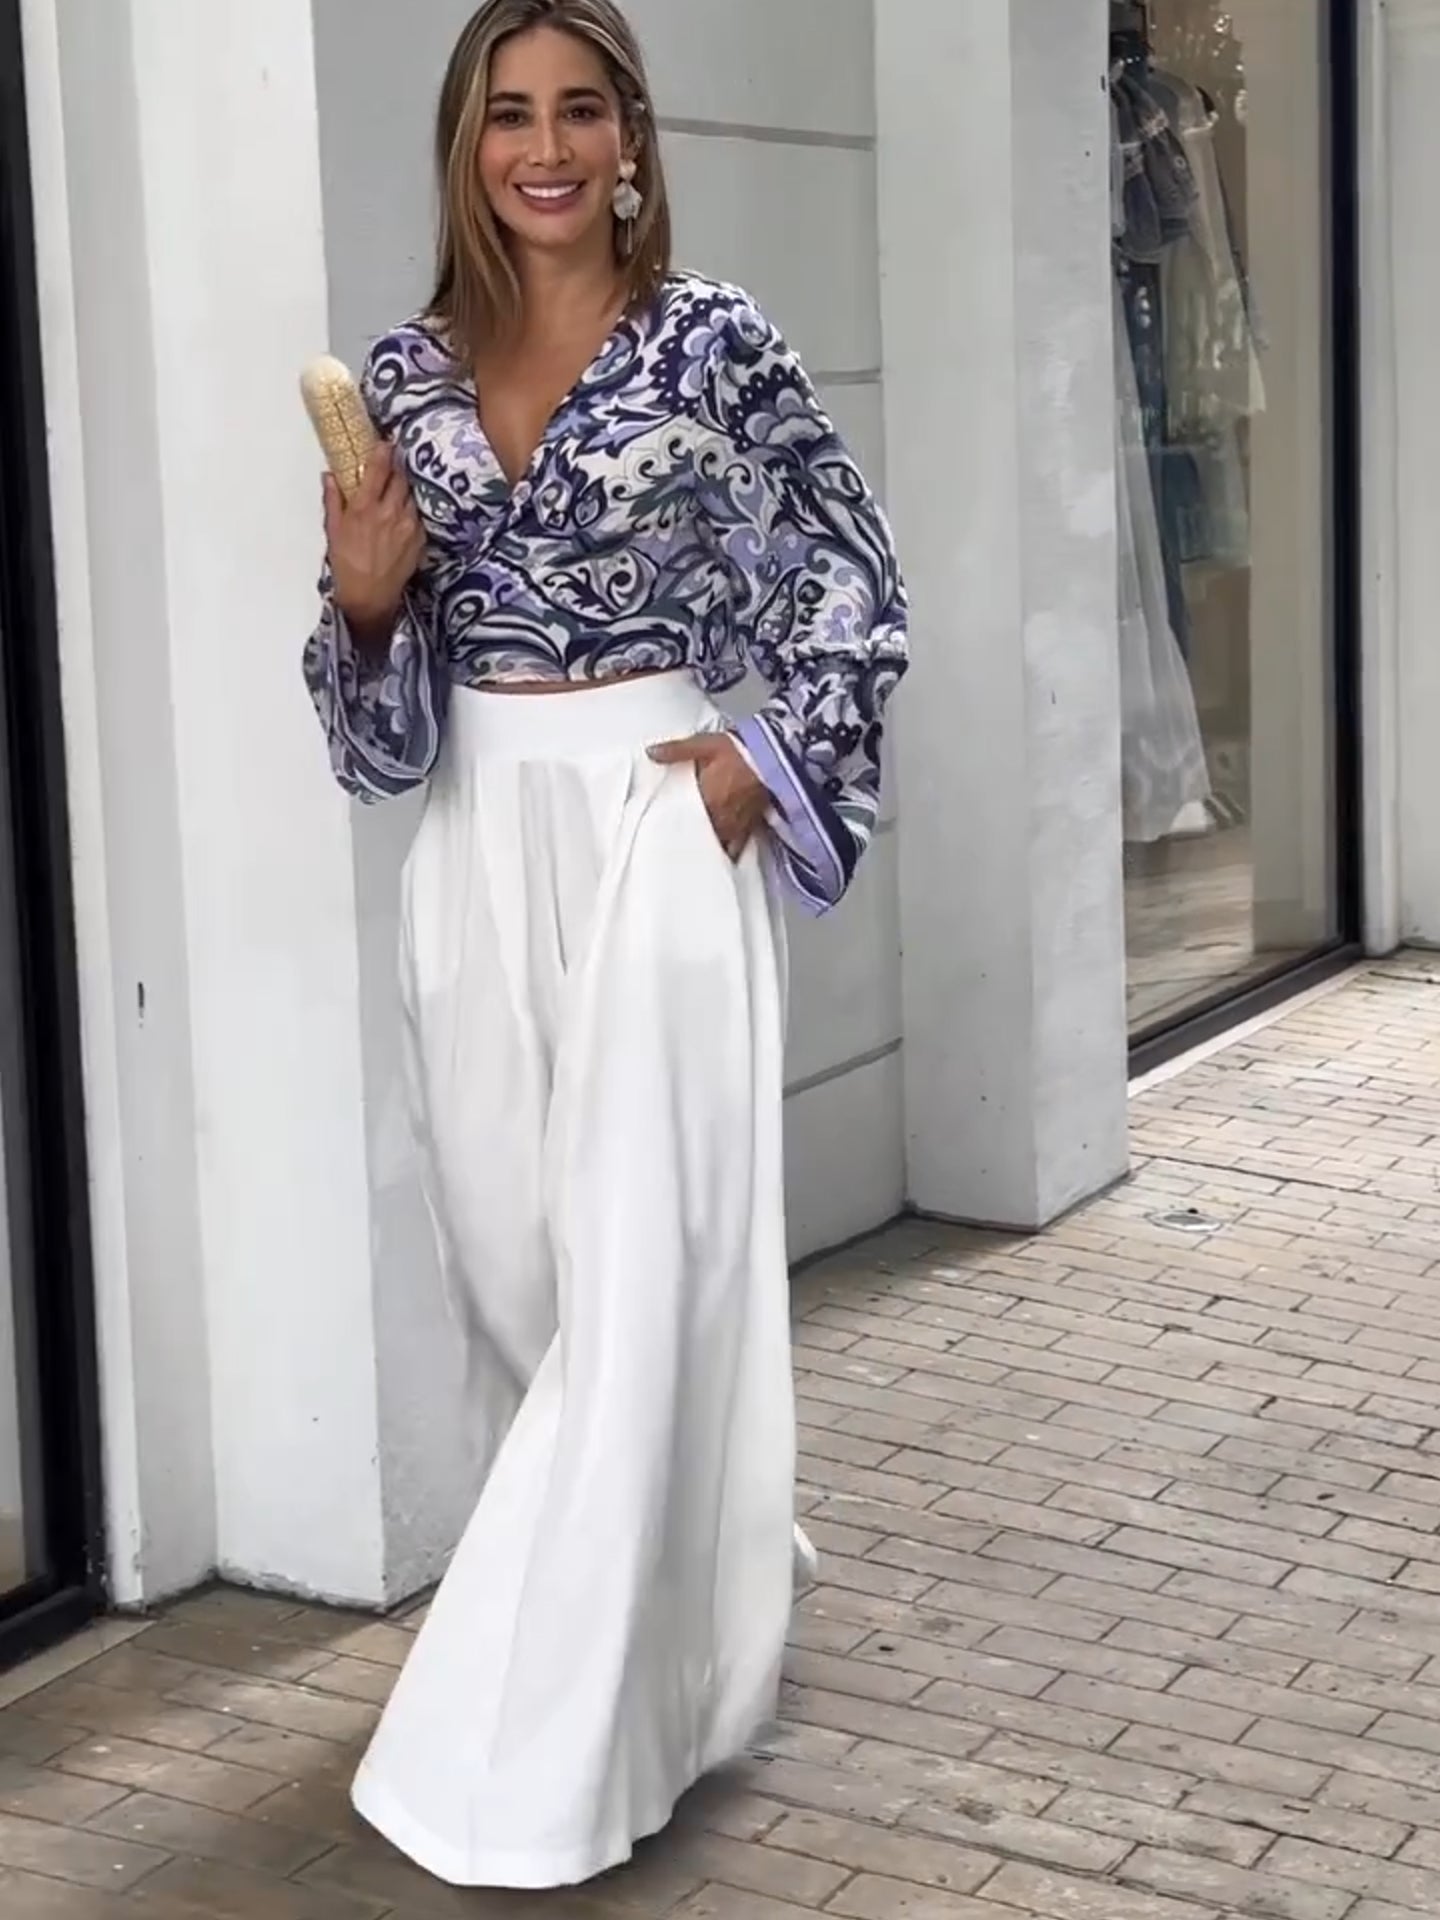 Purple printed top and white loose pants suits